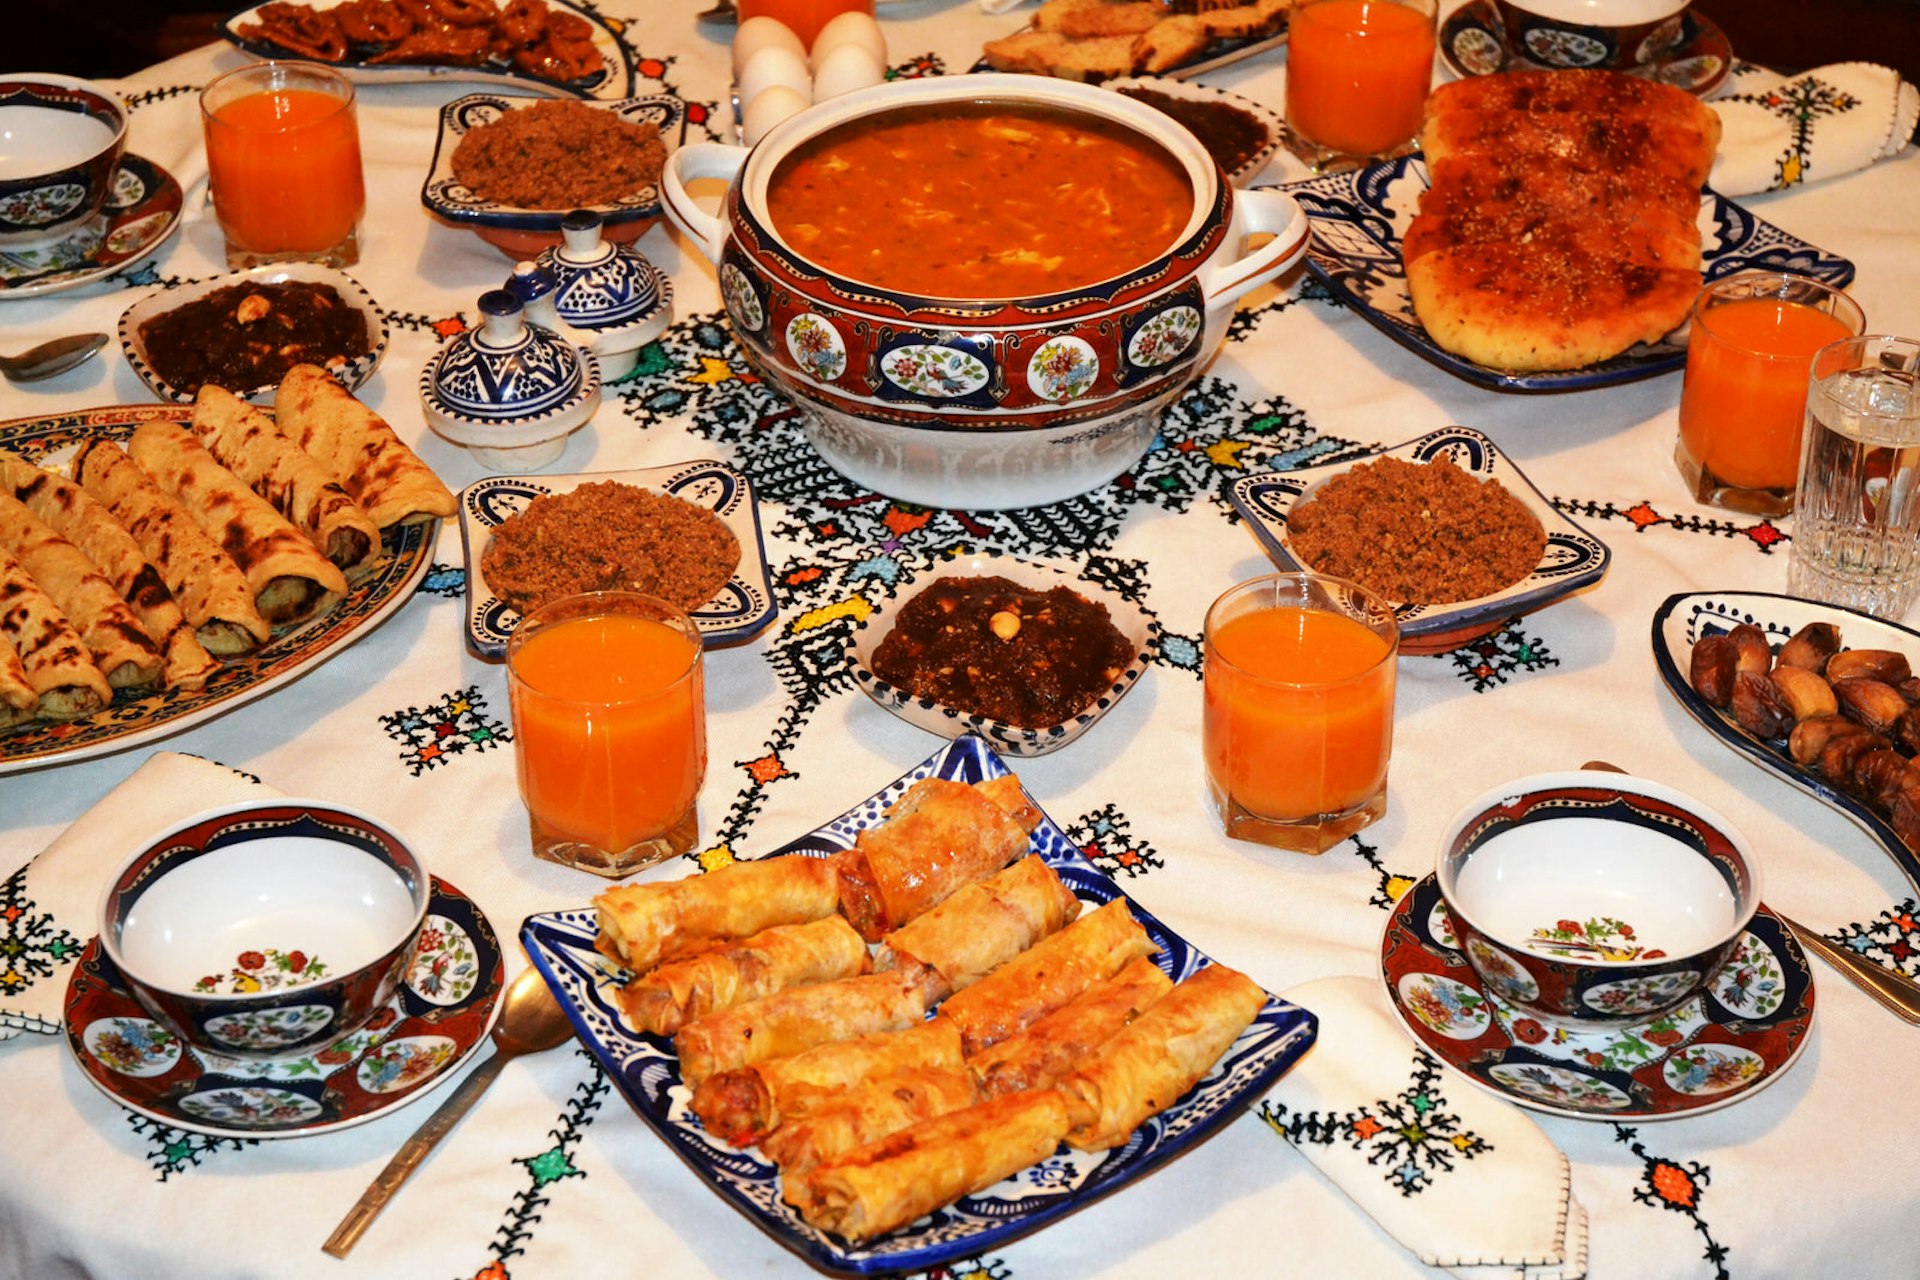 Features - Iftar Ramadan after fasting